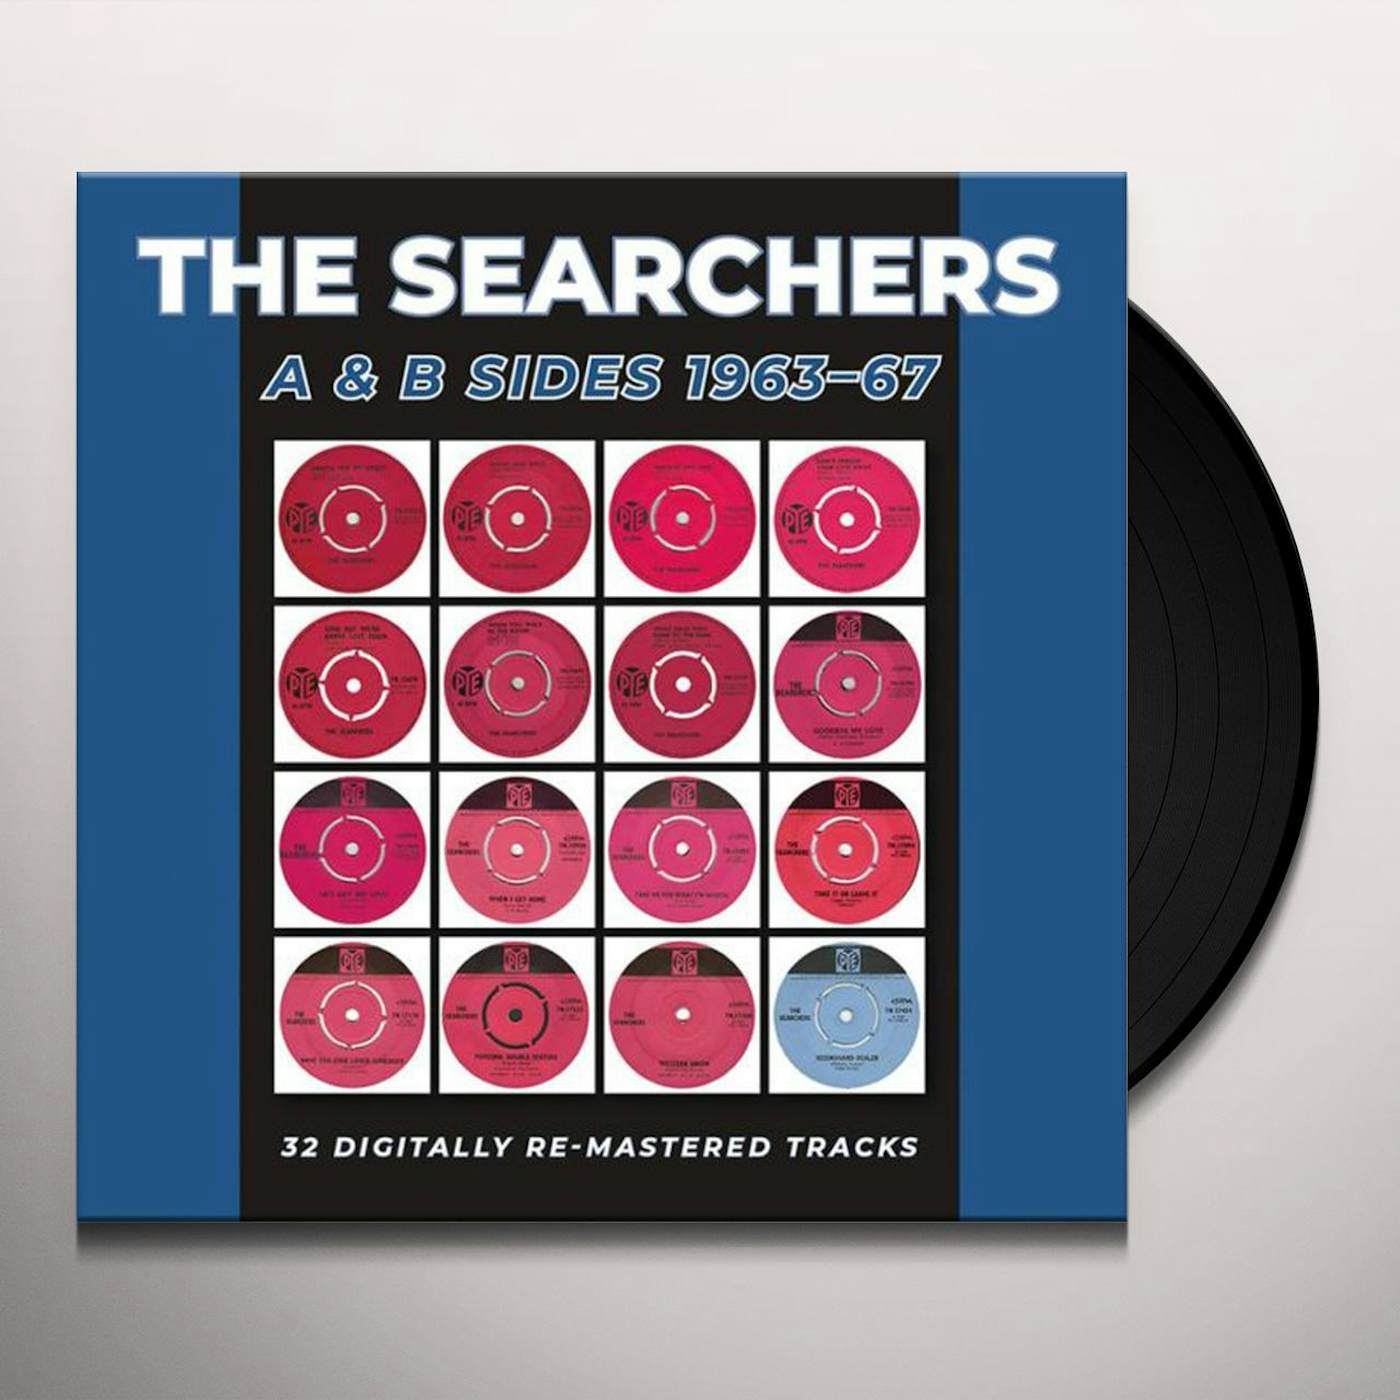 The Searchers A & B SIDES 1963-1967 Vinyl Record